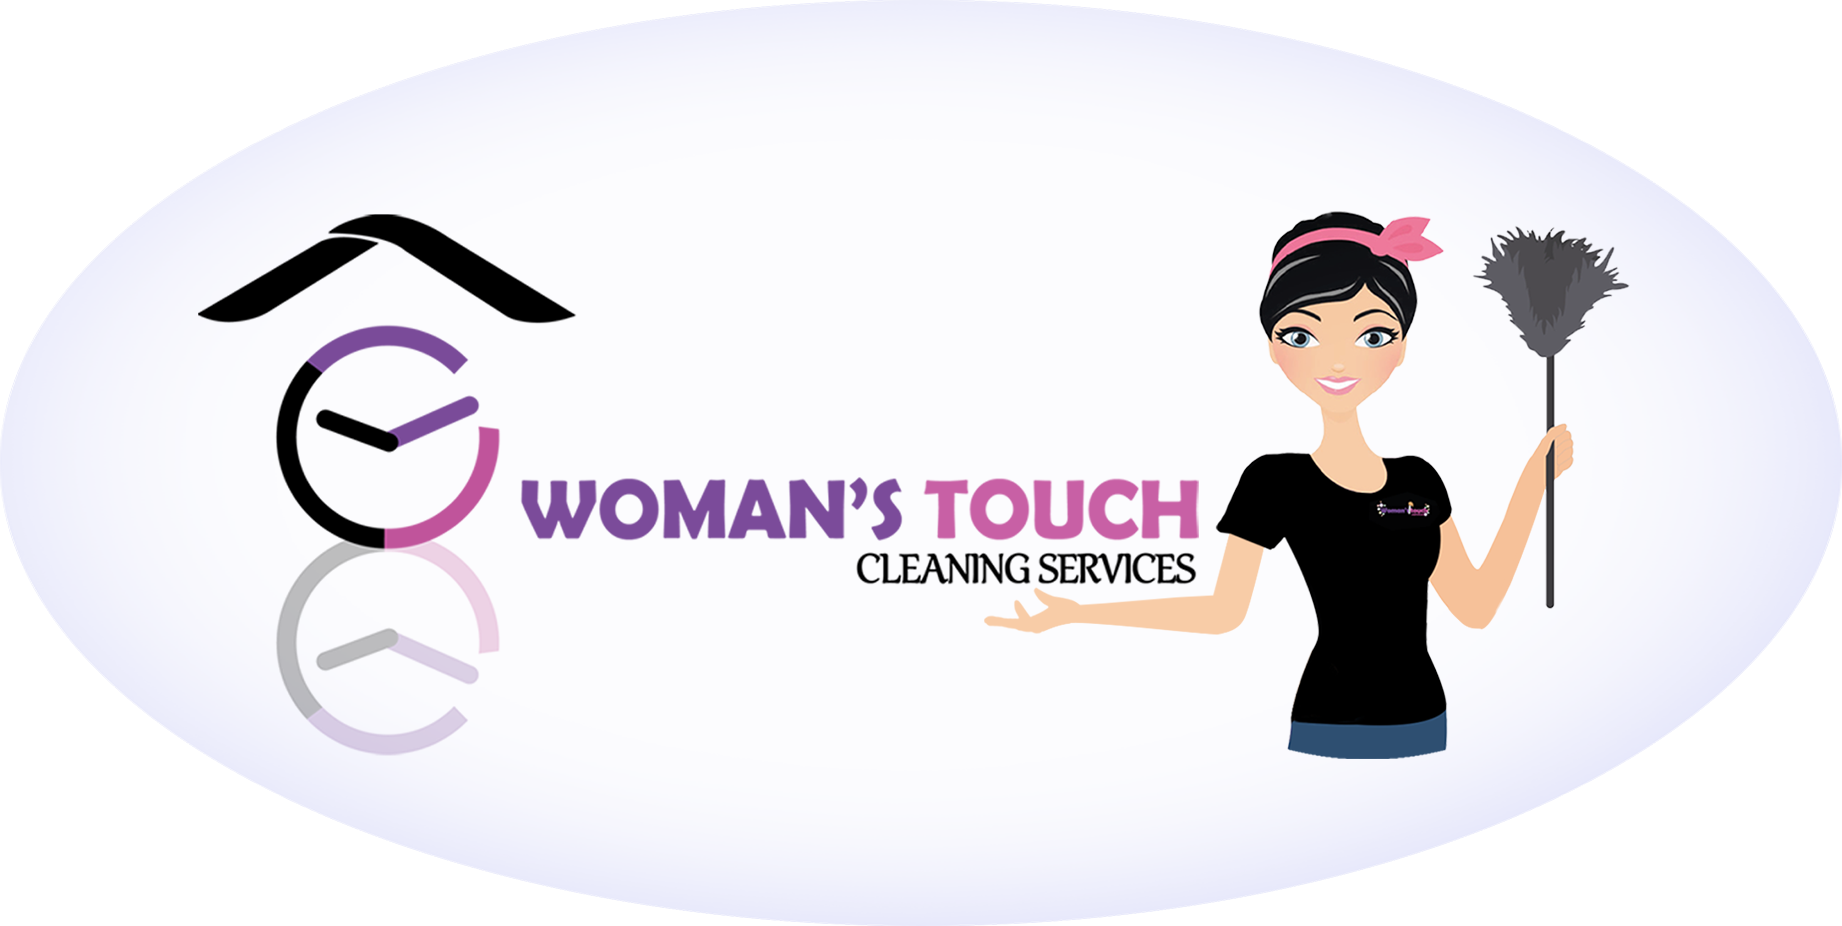 Woman's Touch Cleaning Services